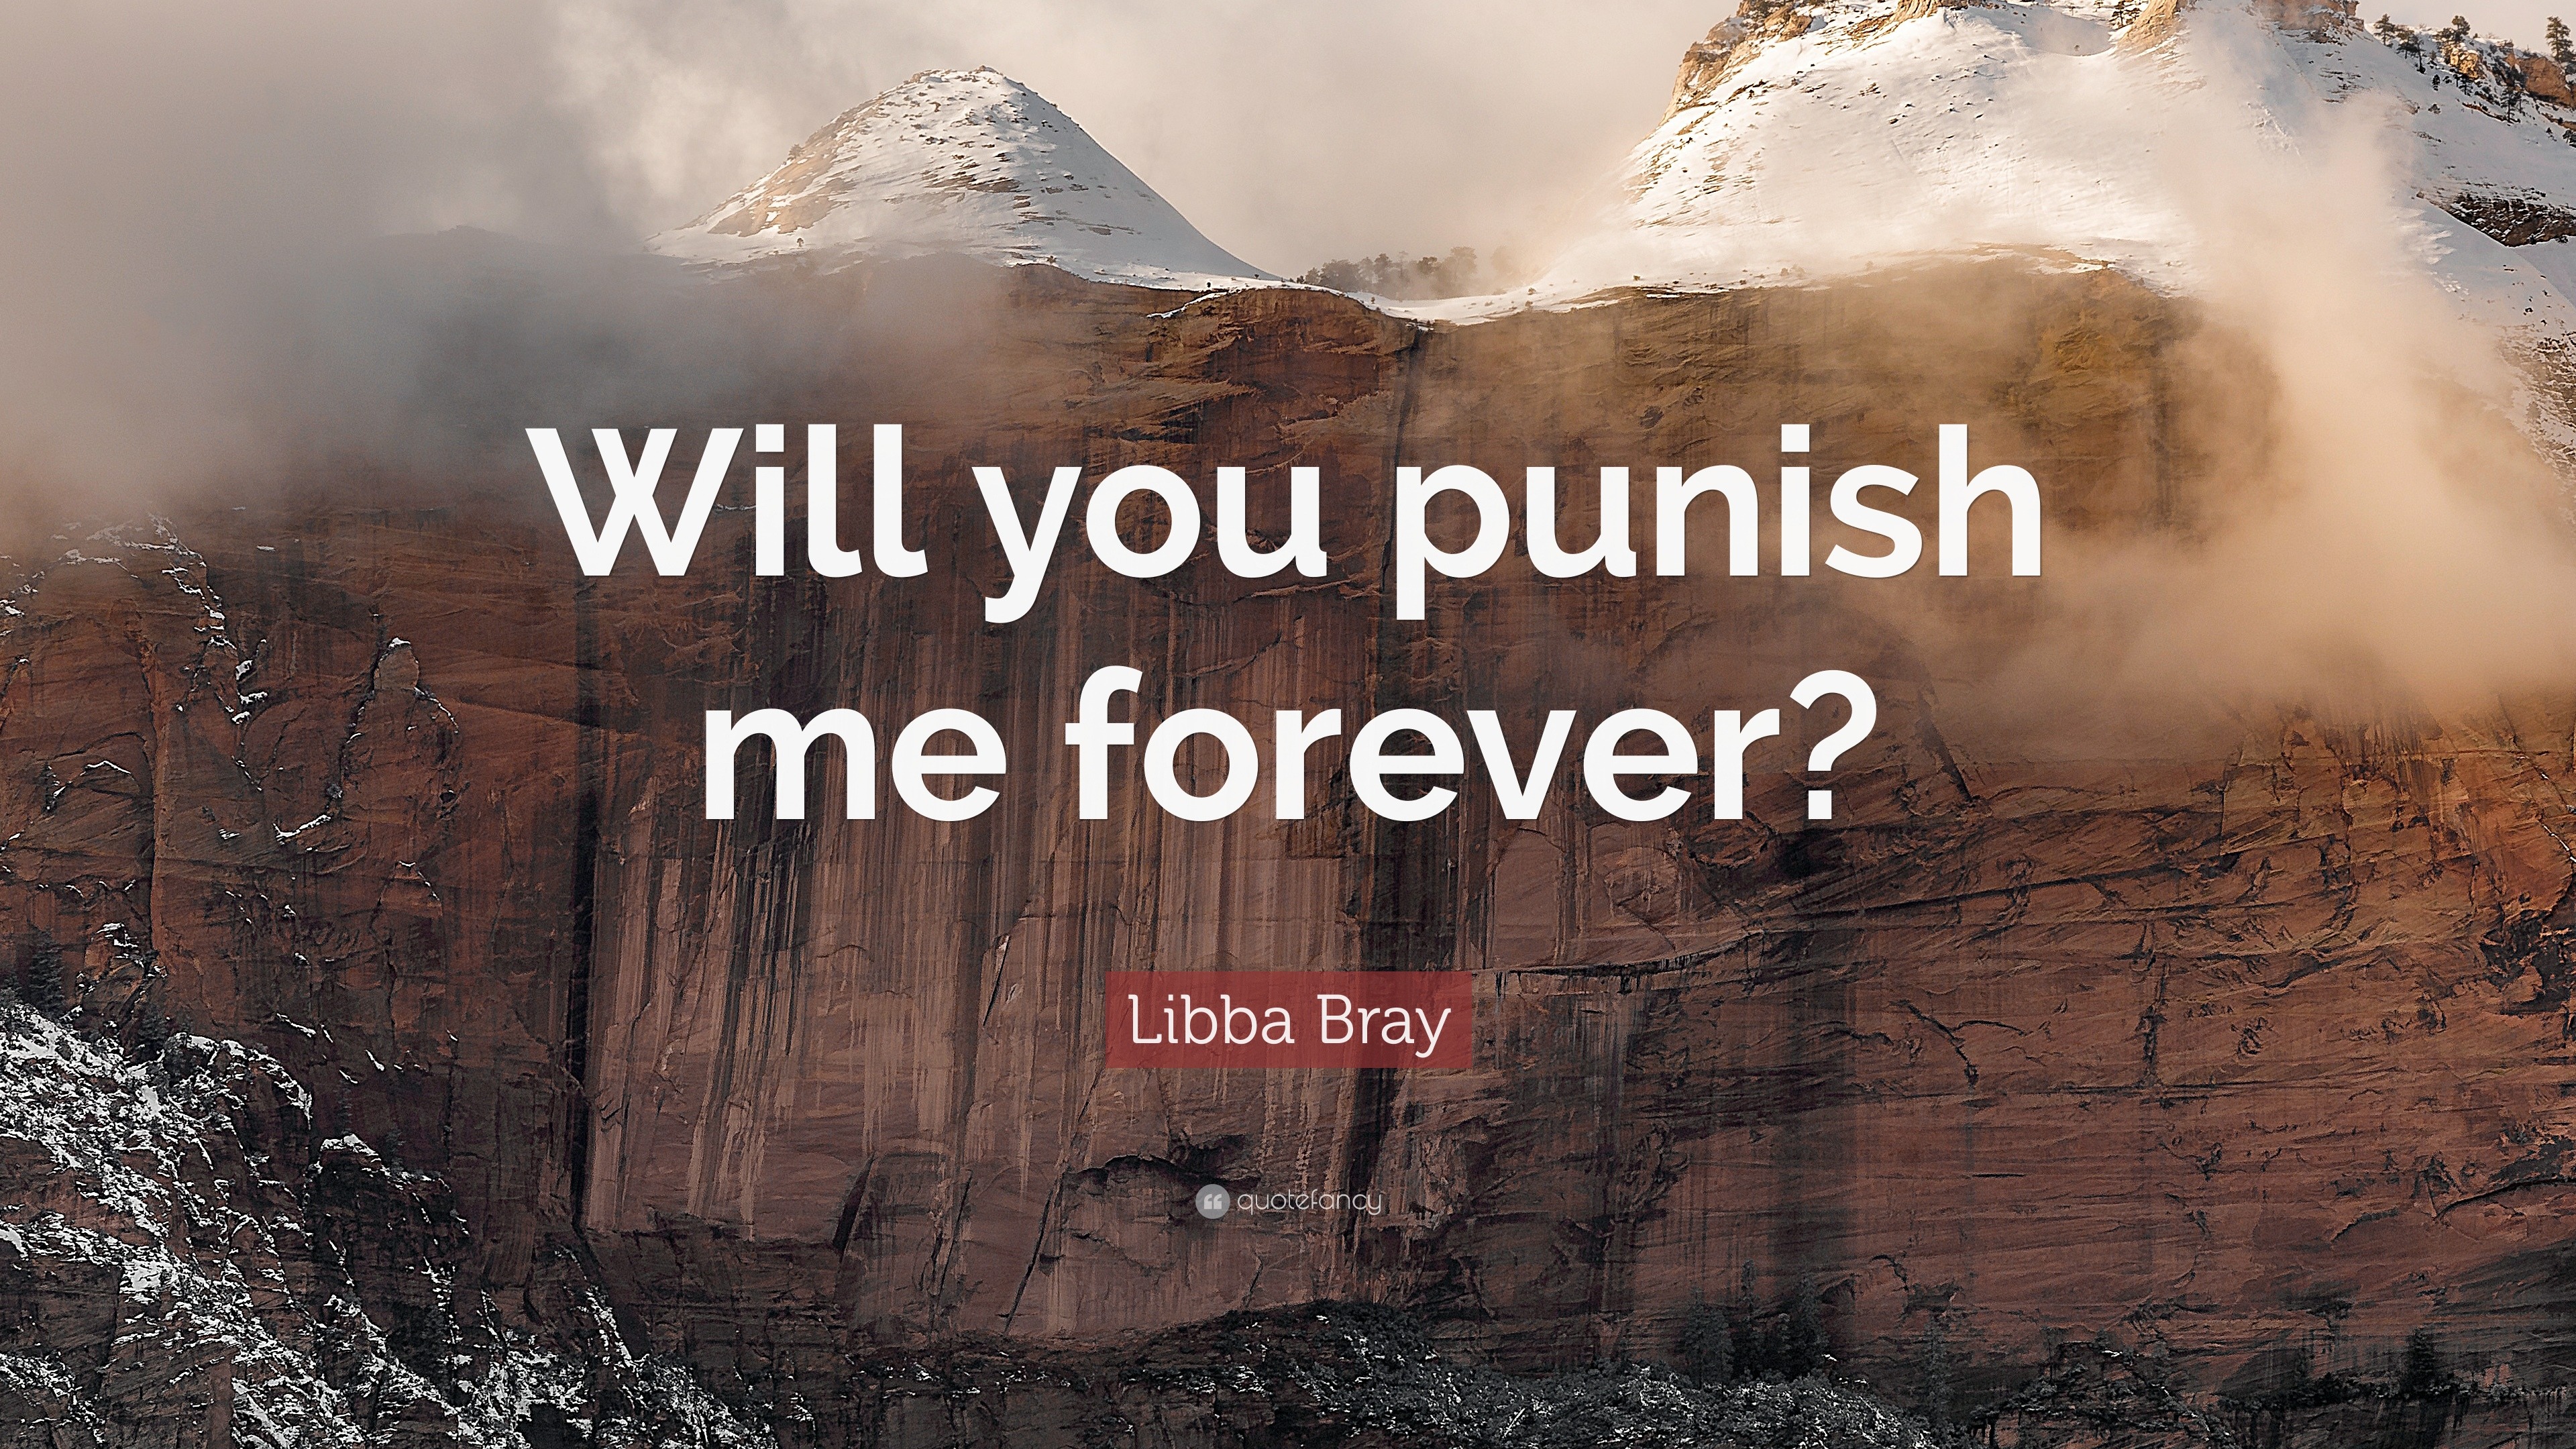 Libba Bray Quote “Will you punish me forever ”